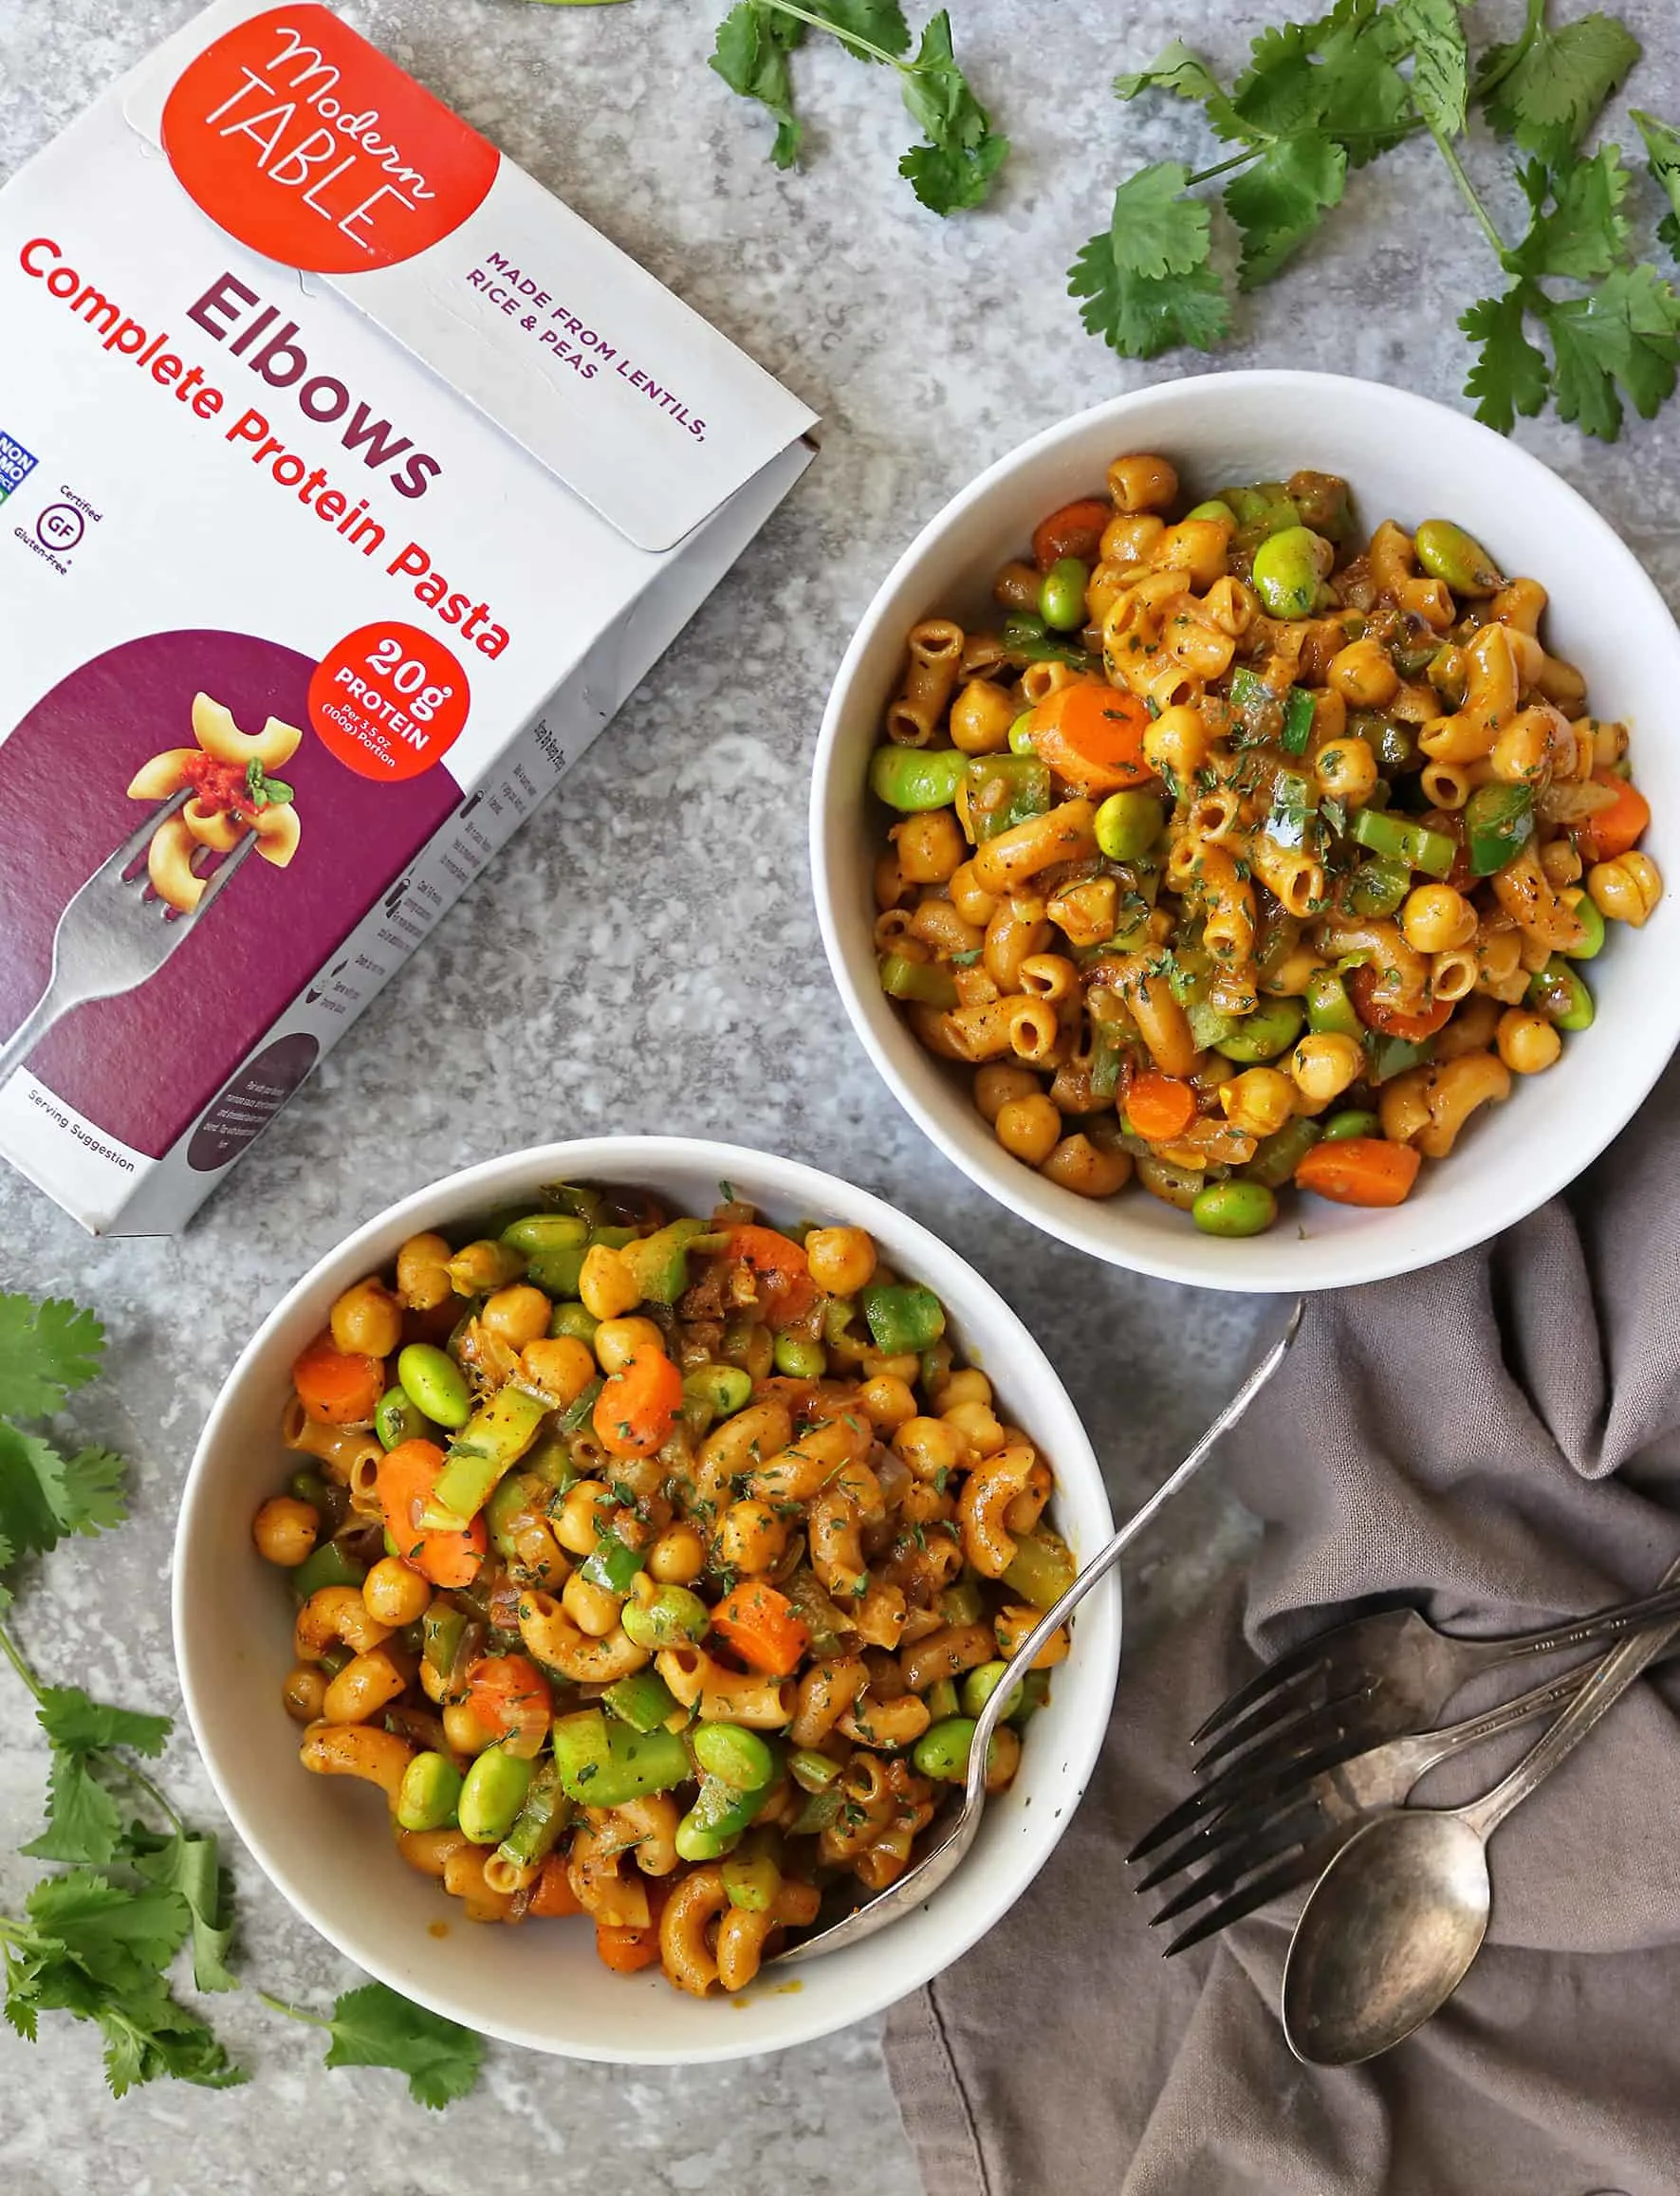 Vegan Creamy Curry Pasta for A wholesome plant-based meal idea.